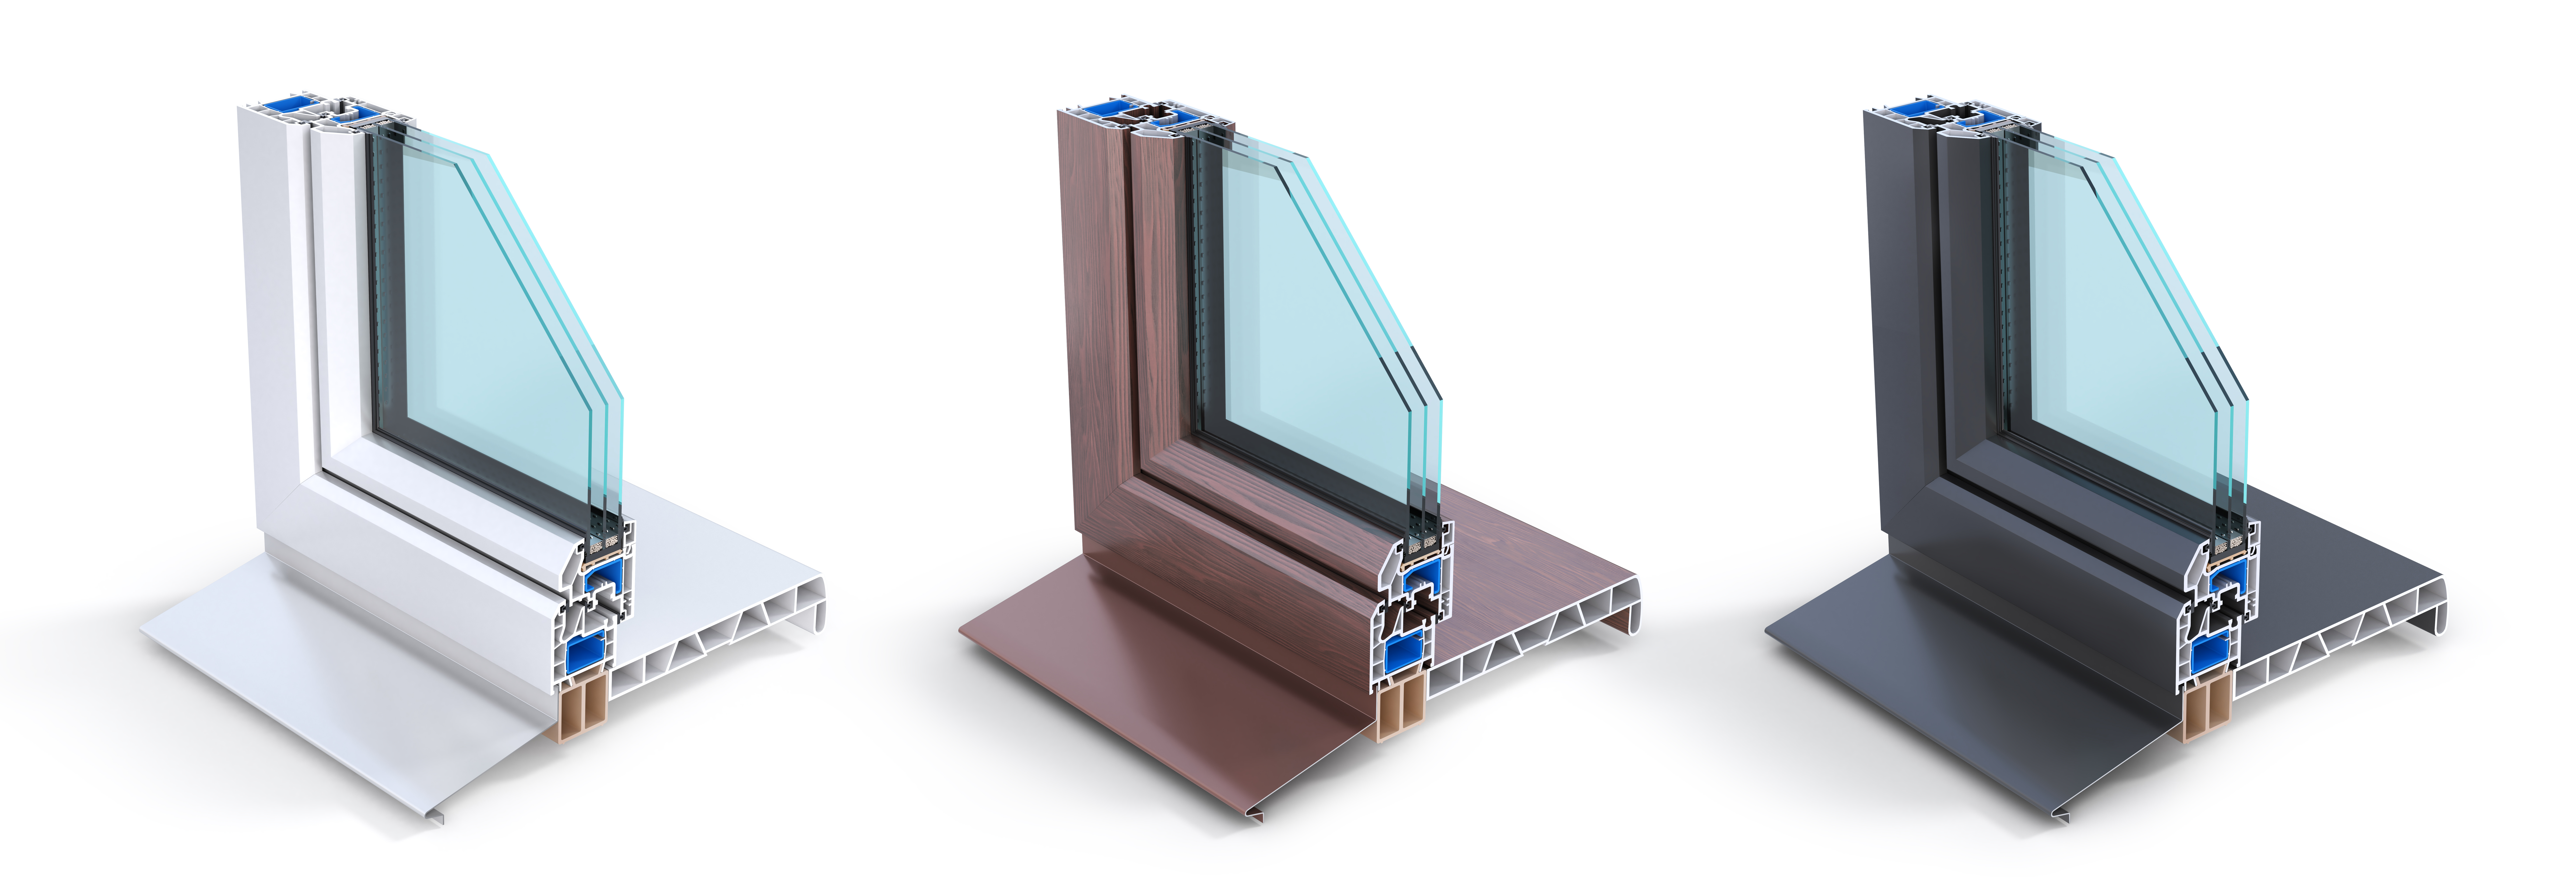 Four different types of Triple Pane Windows in various colors.